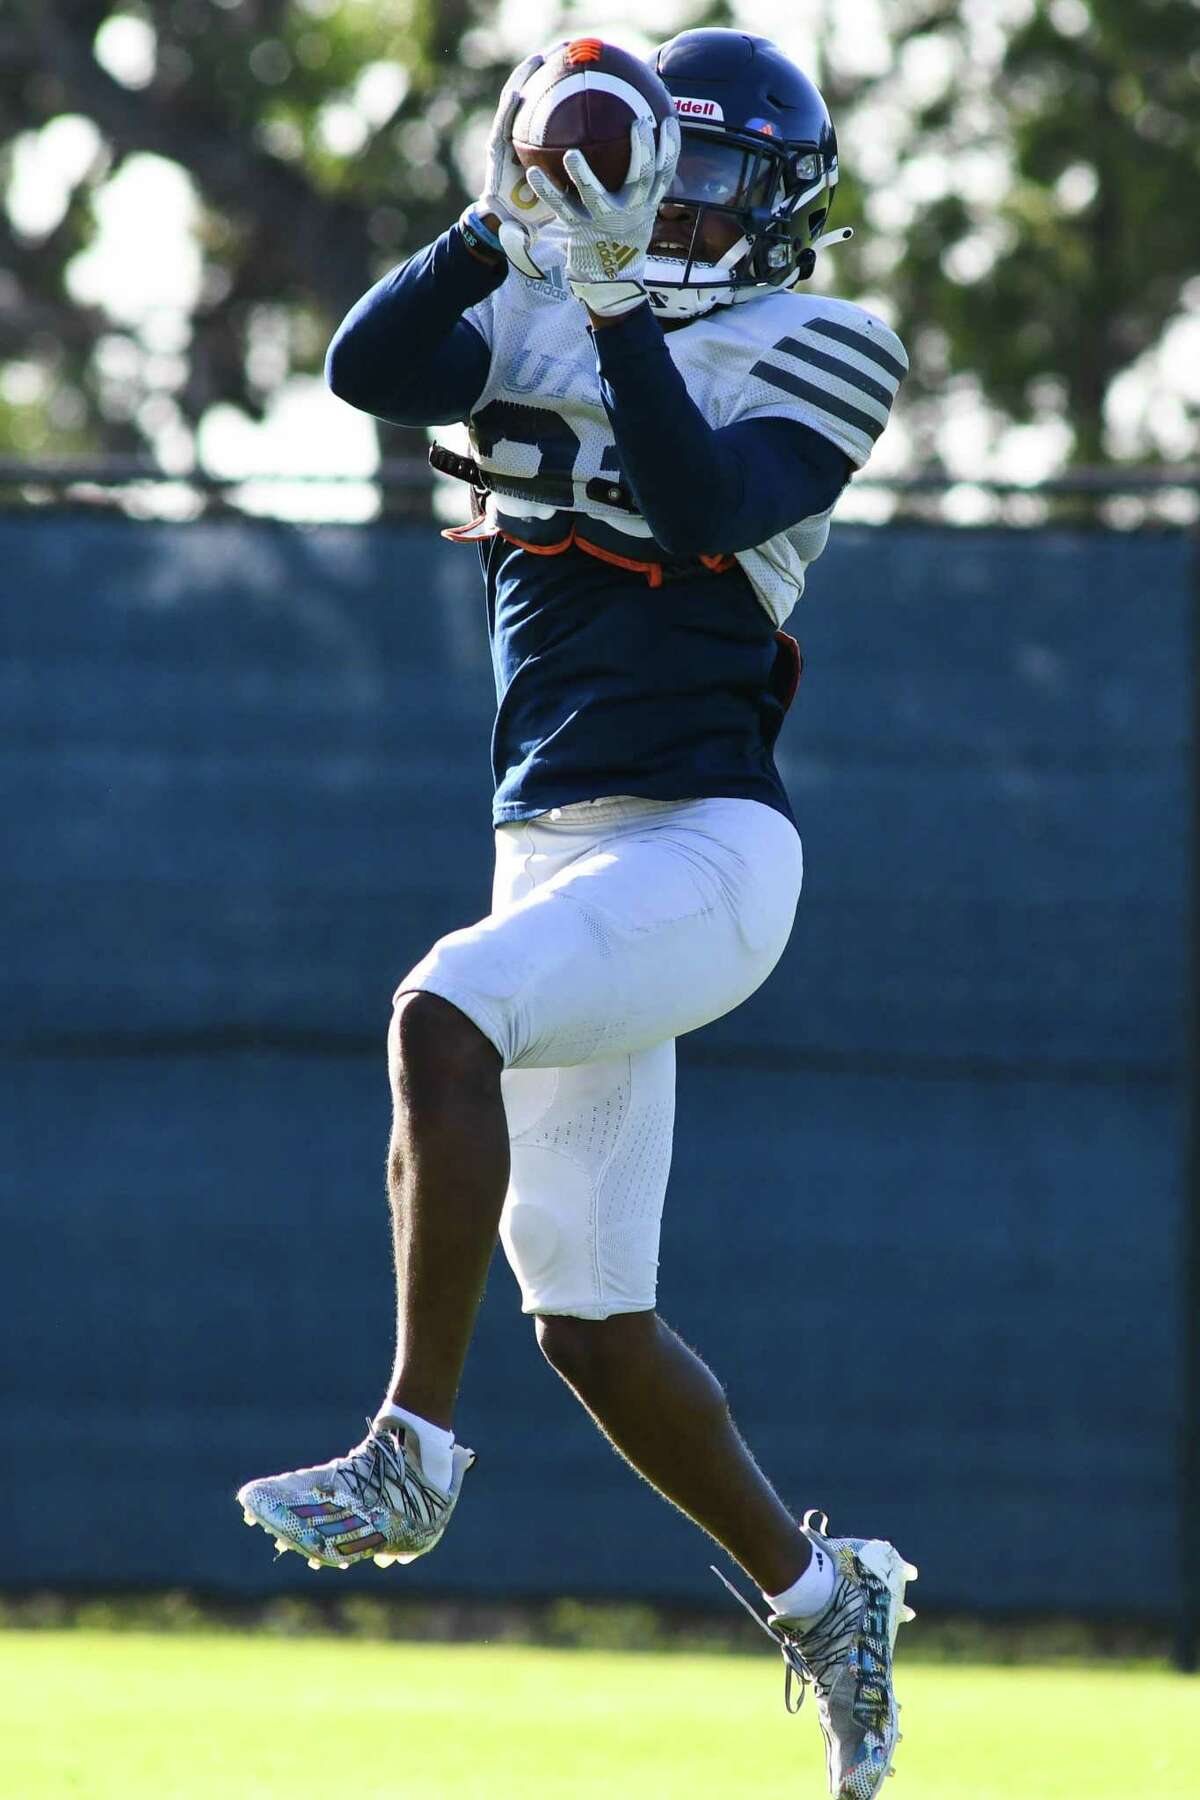 UTSA’s Ken Robinson catches a pass while takeing part in a drill at practice on Aug. 10, 2022.